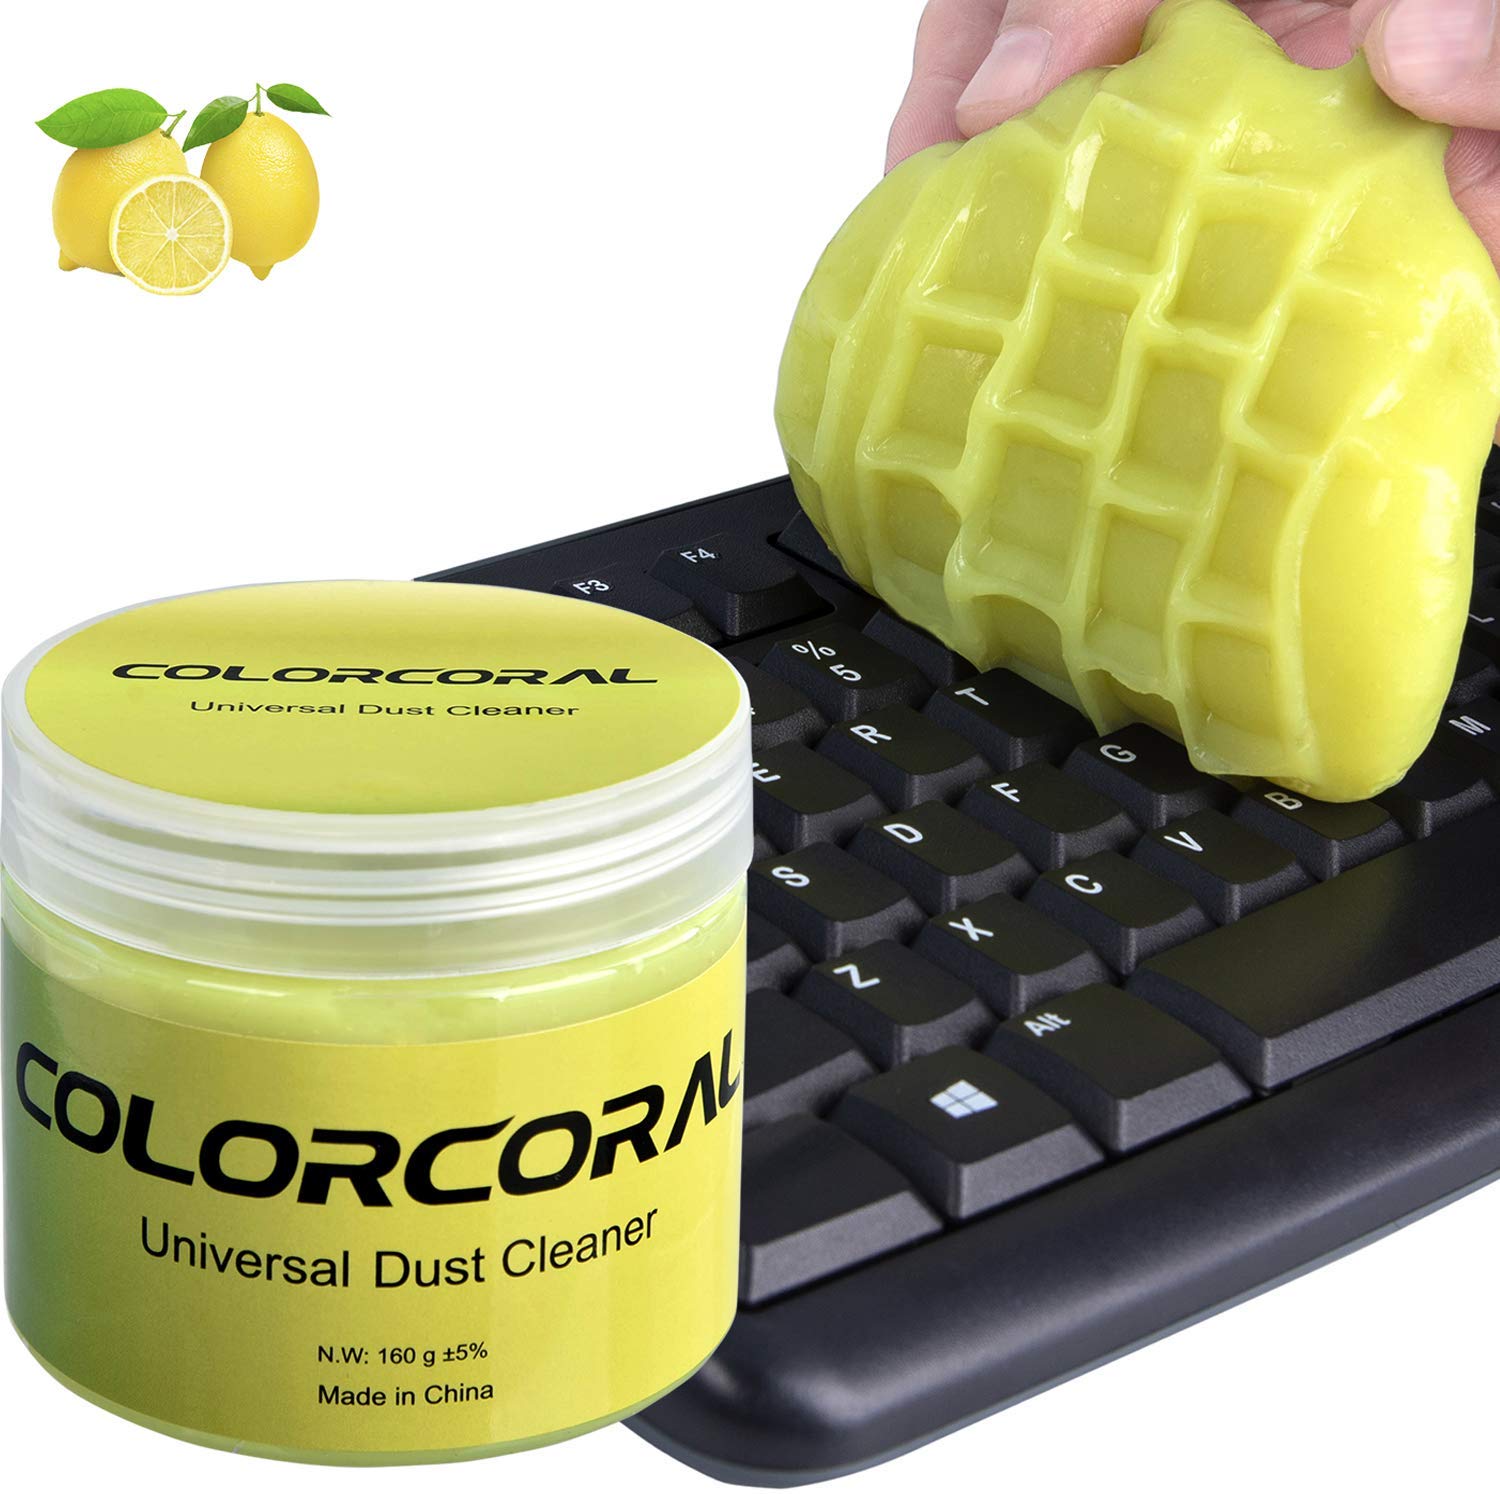 Keyboard Cleaner Deal Offer from Amazon